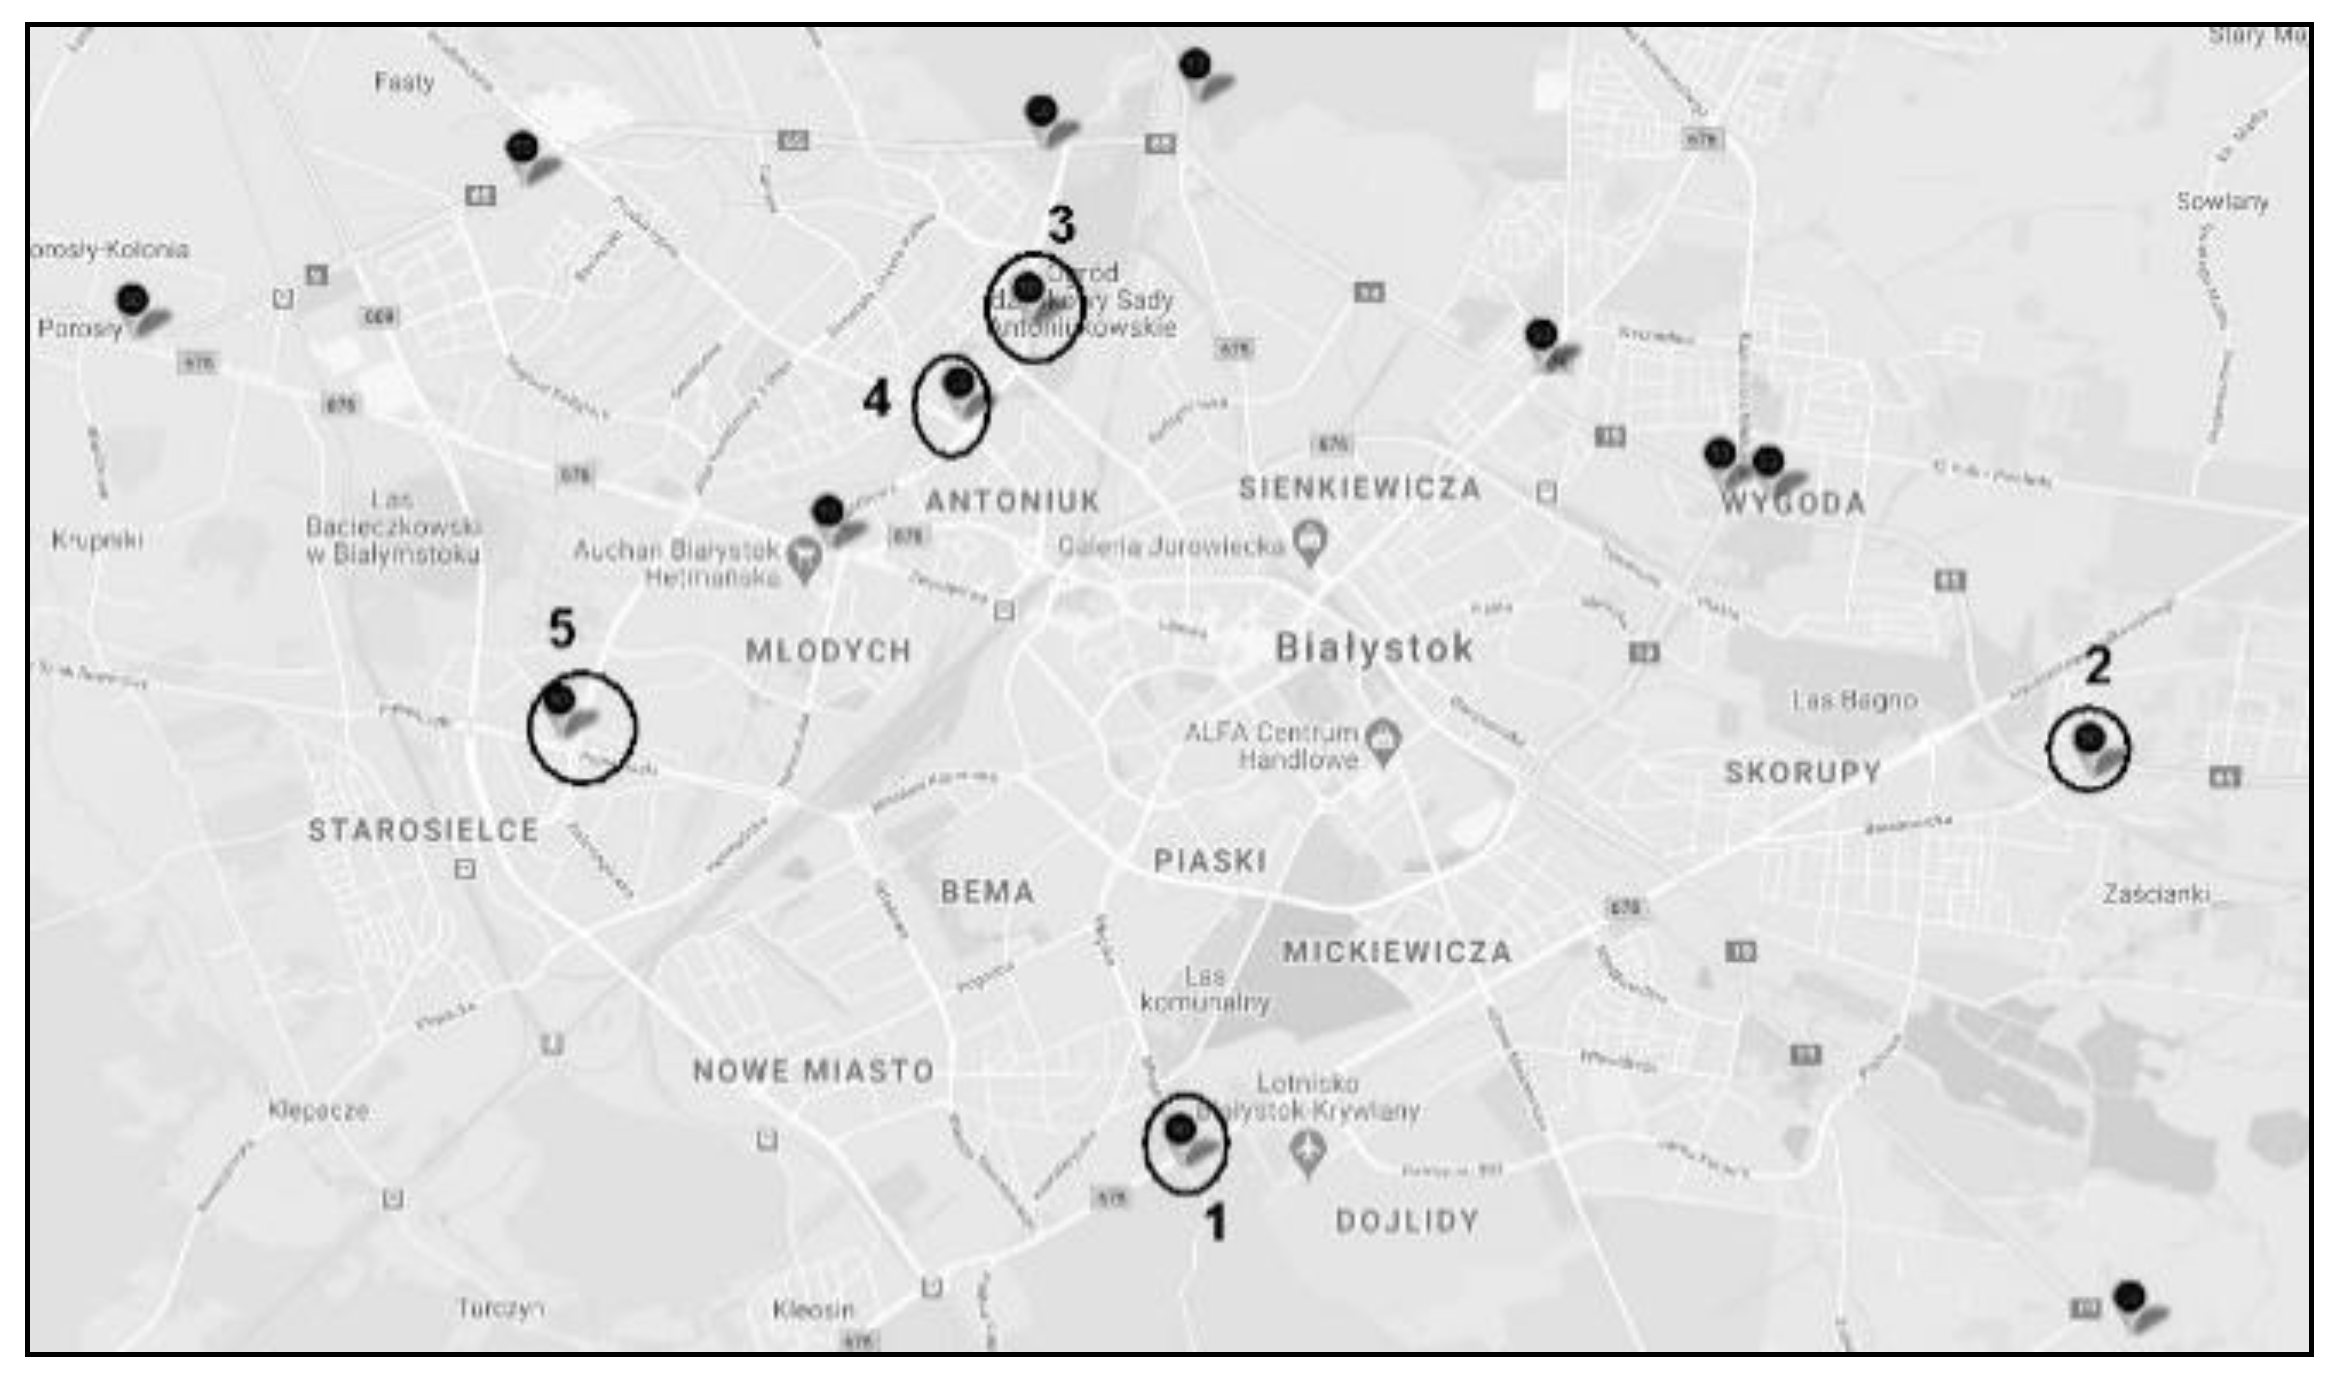 Energies | Free Full-Text | Investigations of the Dynamic Travel Time  Information Impact on Drivers' Route Choice in an Urban Area—A Case Study  Based on the City of Bialystok